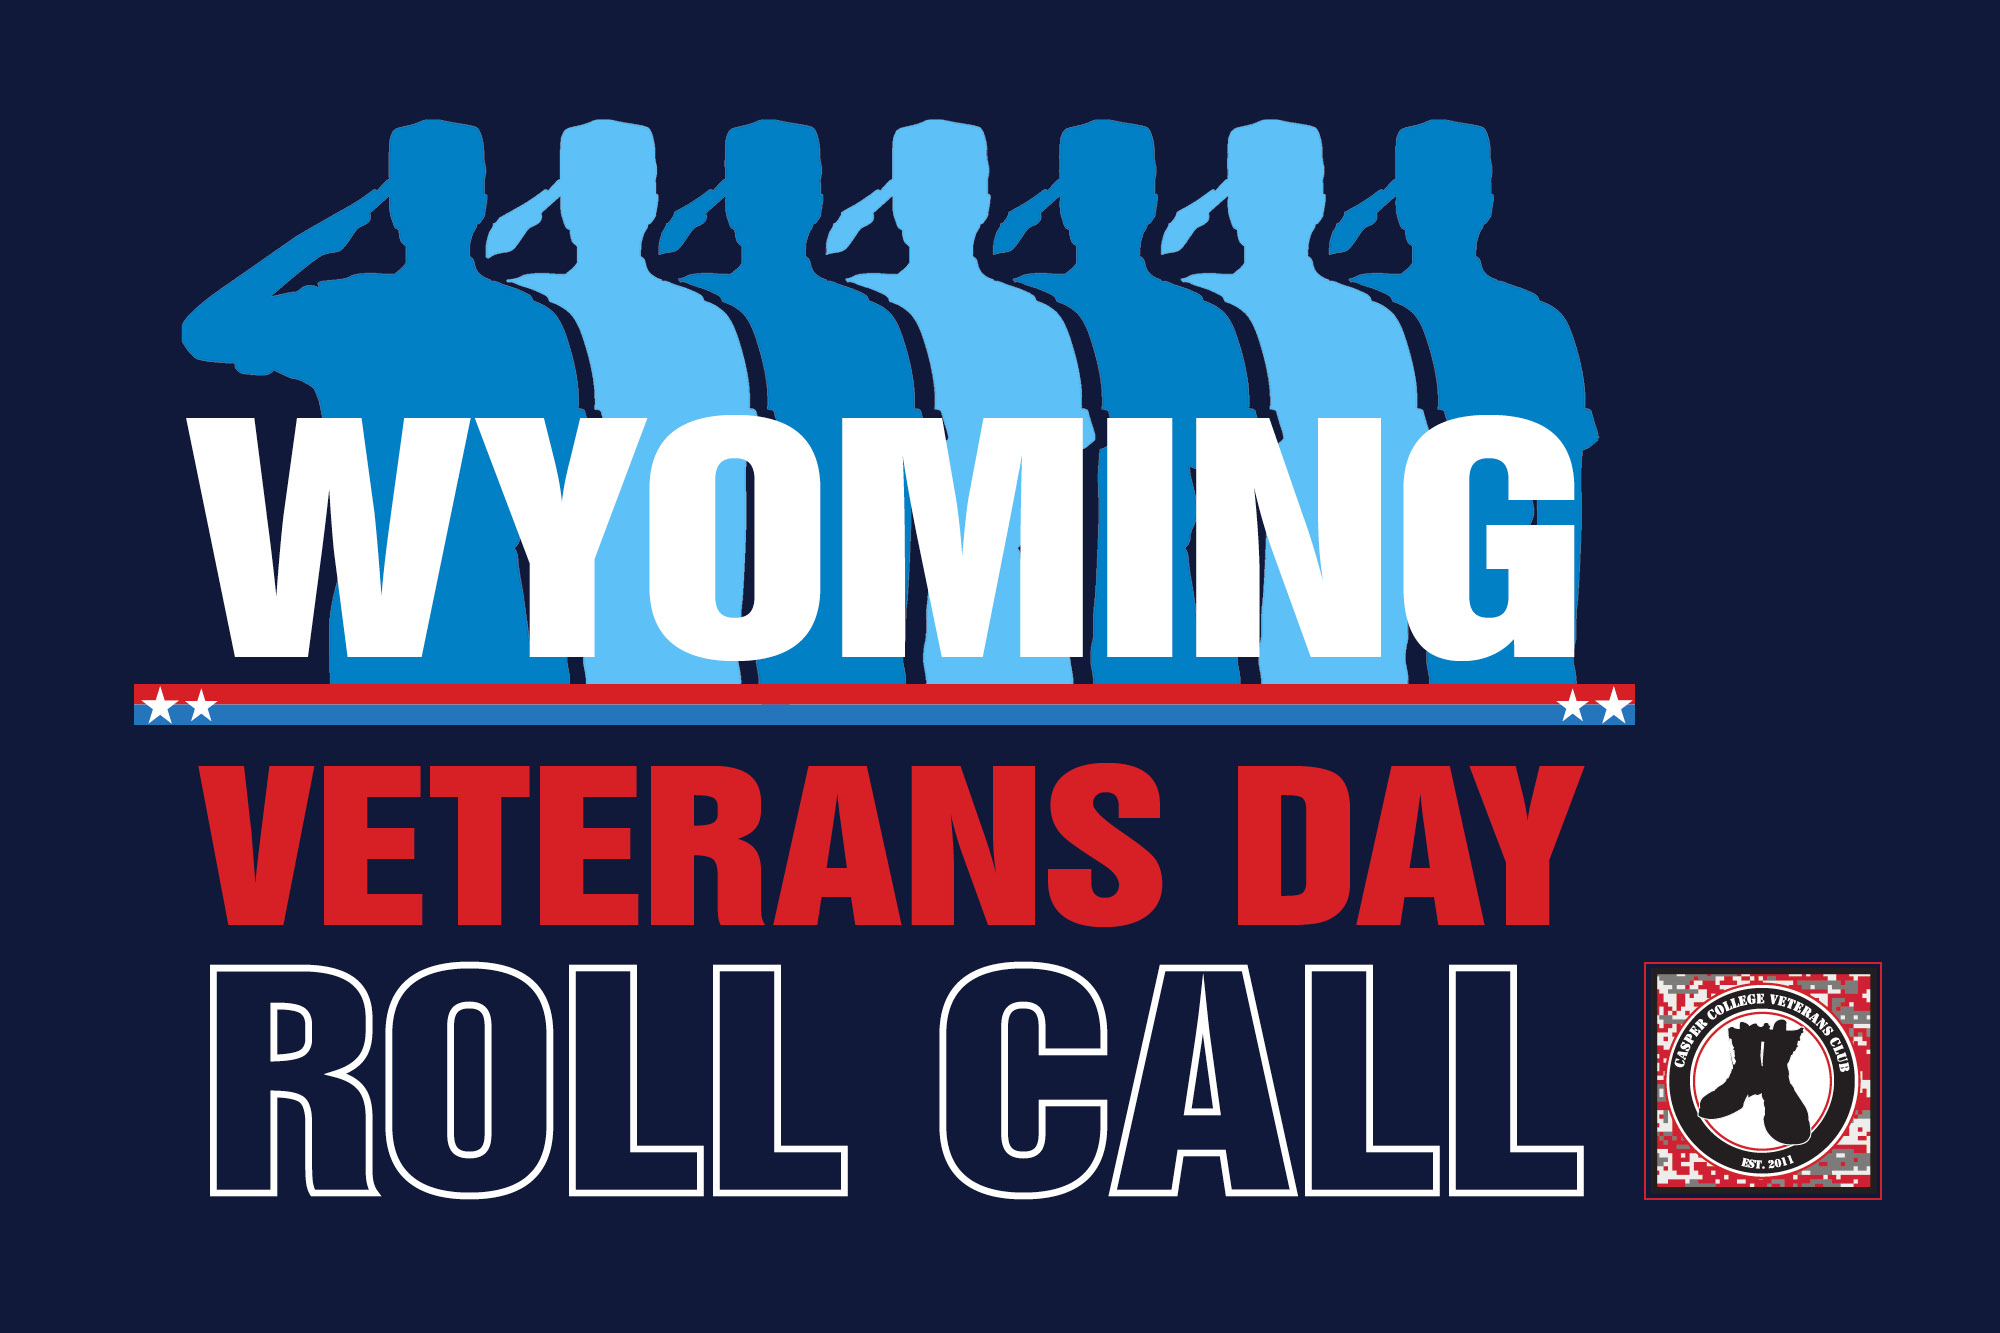 Image for Veterans Roll Call.